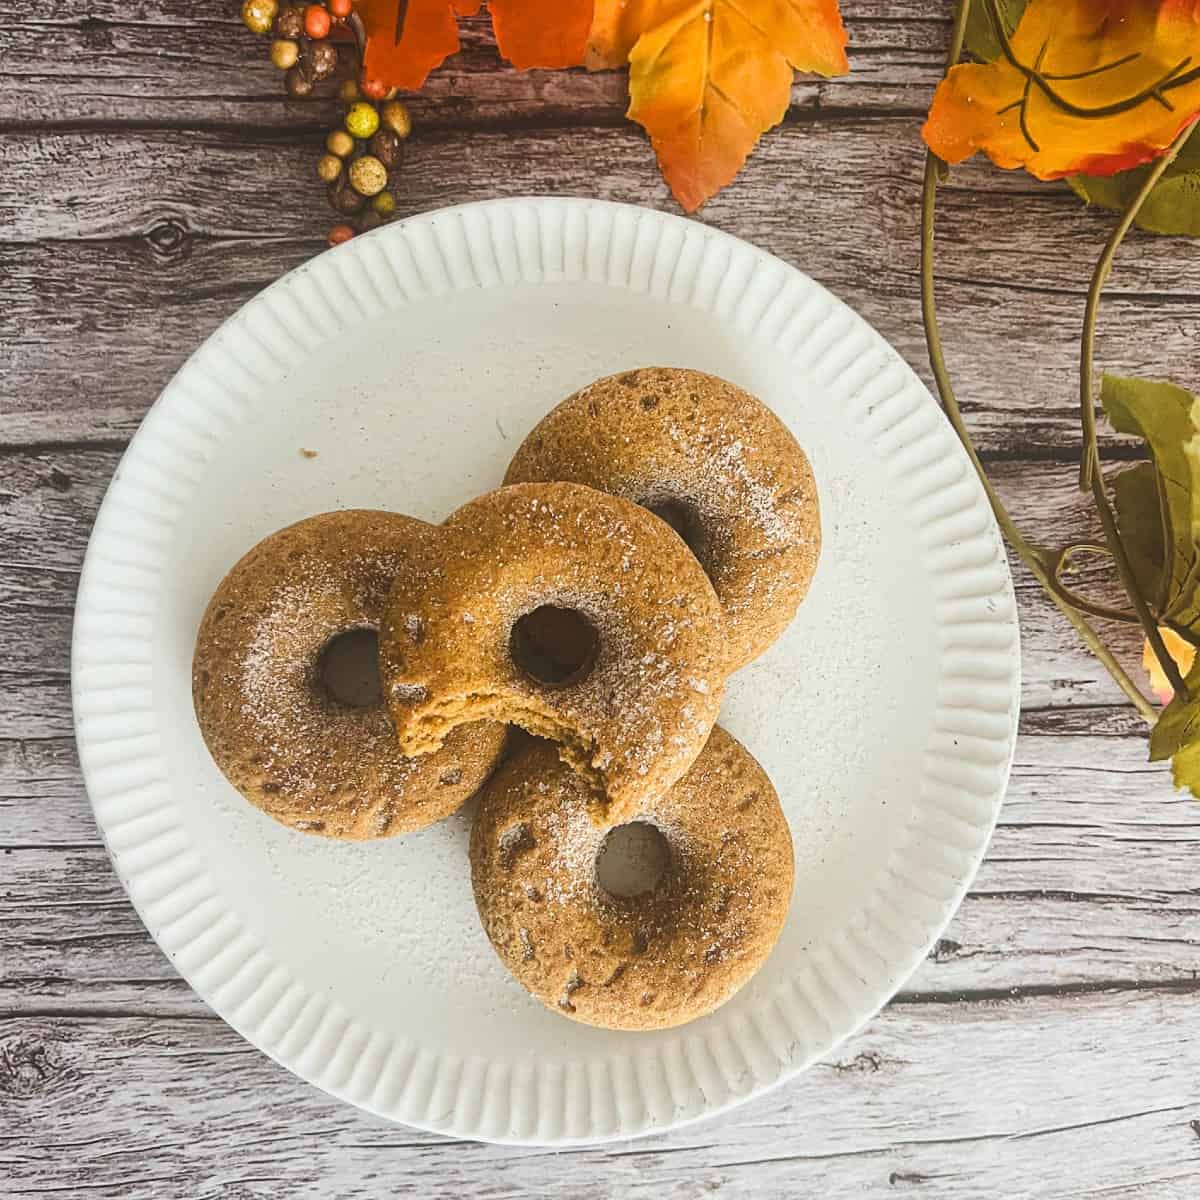 a pumpkin spice donut sitting on a white plate. The donut is round and has a hole in the center. It is topped with pumpkin spice and sugar. 